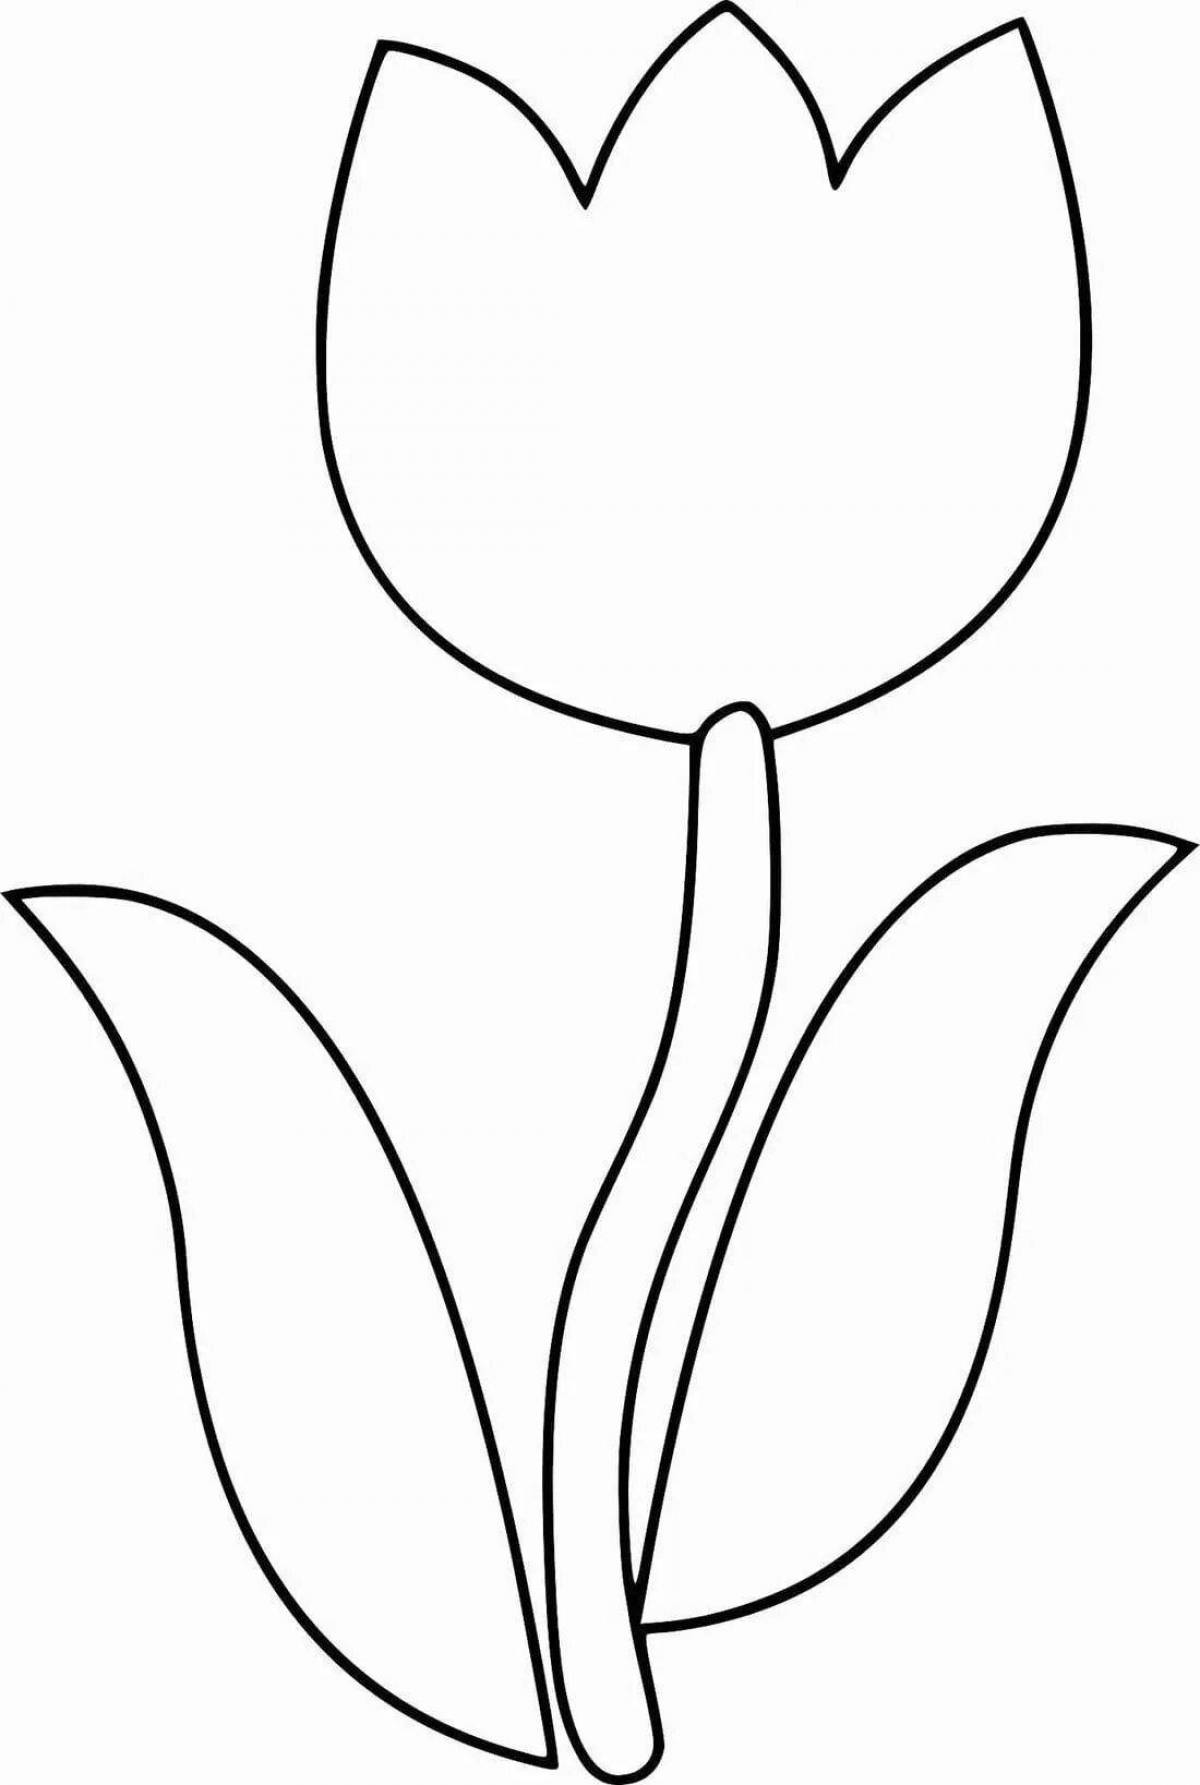 Cute tulip coloring page for kids